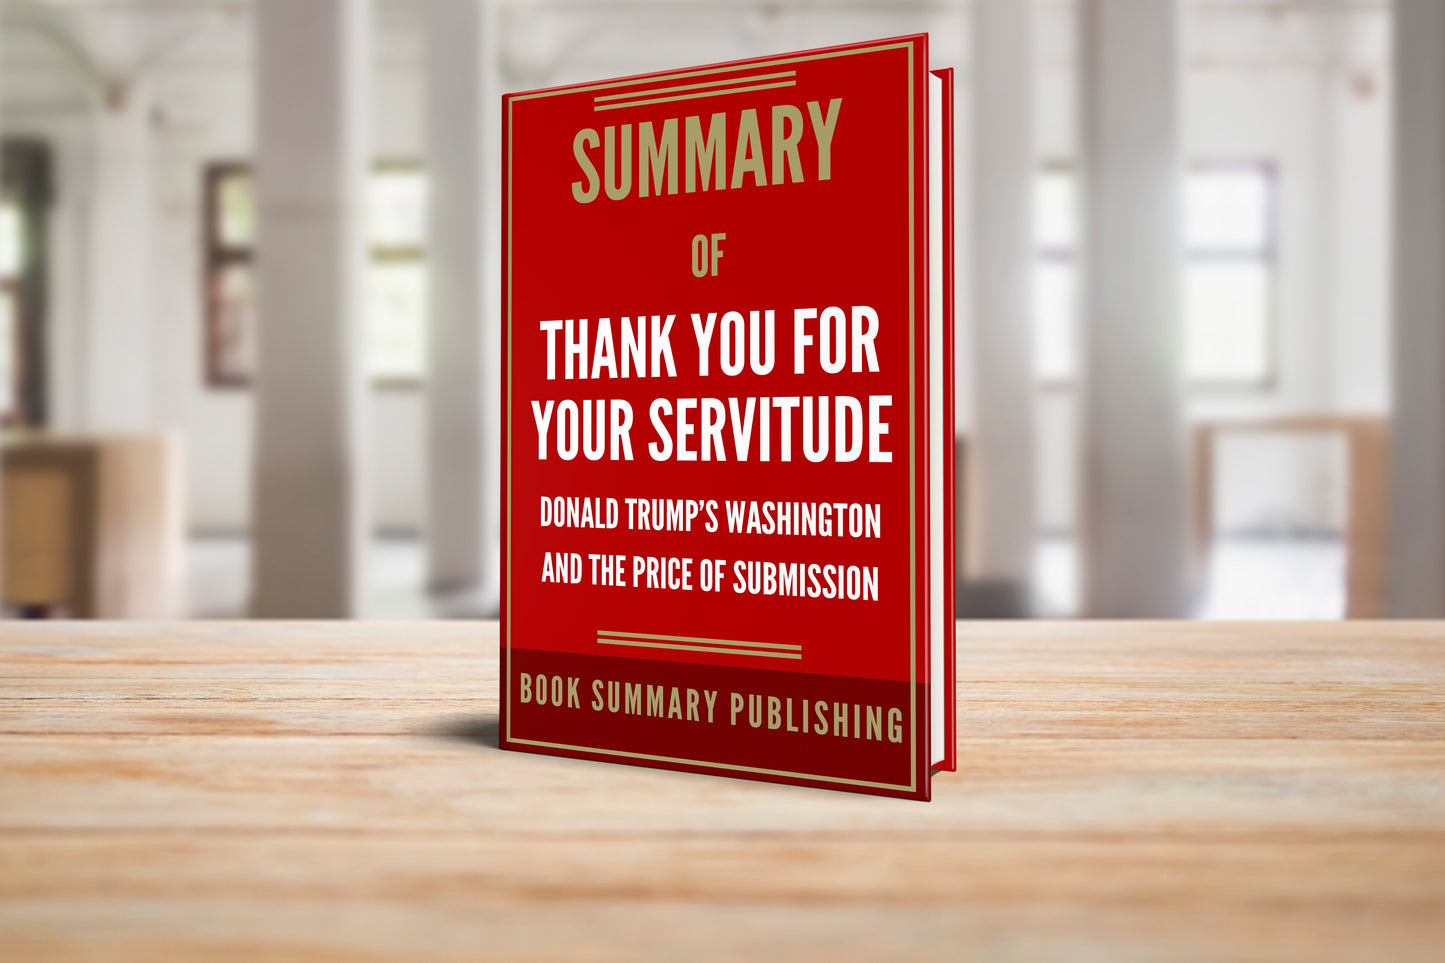 Summary of "Thank You for Your Servitude: Donald Trump's Washington and the Price of Submission"